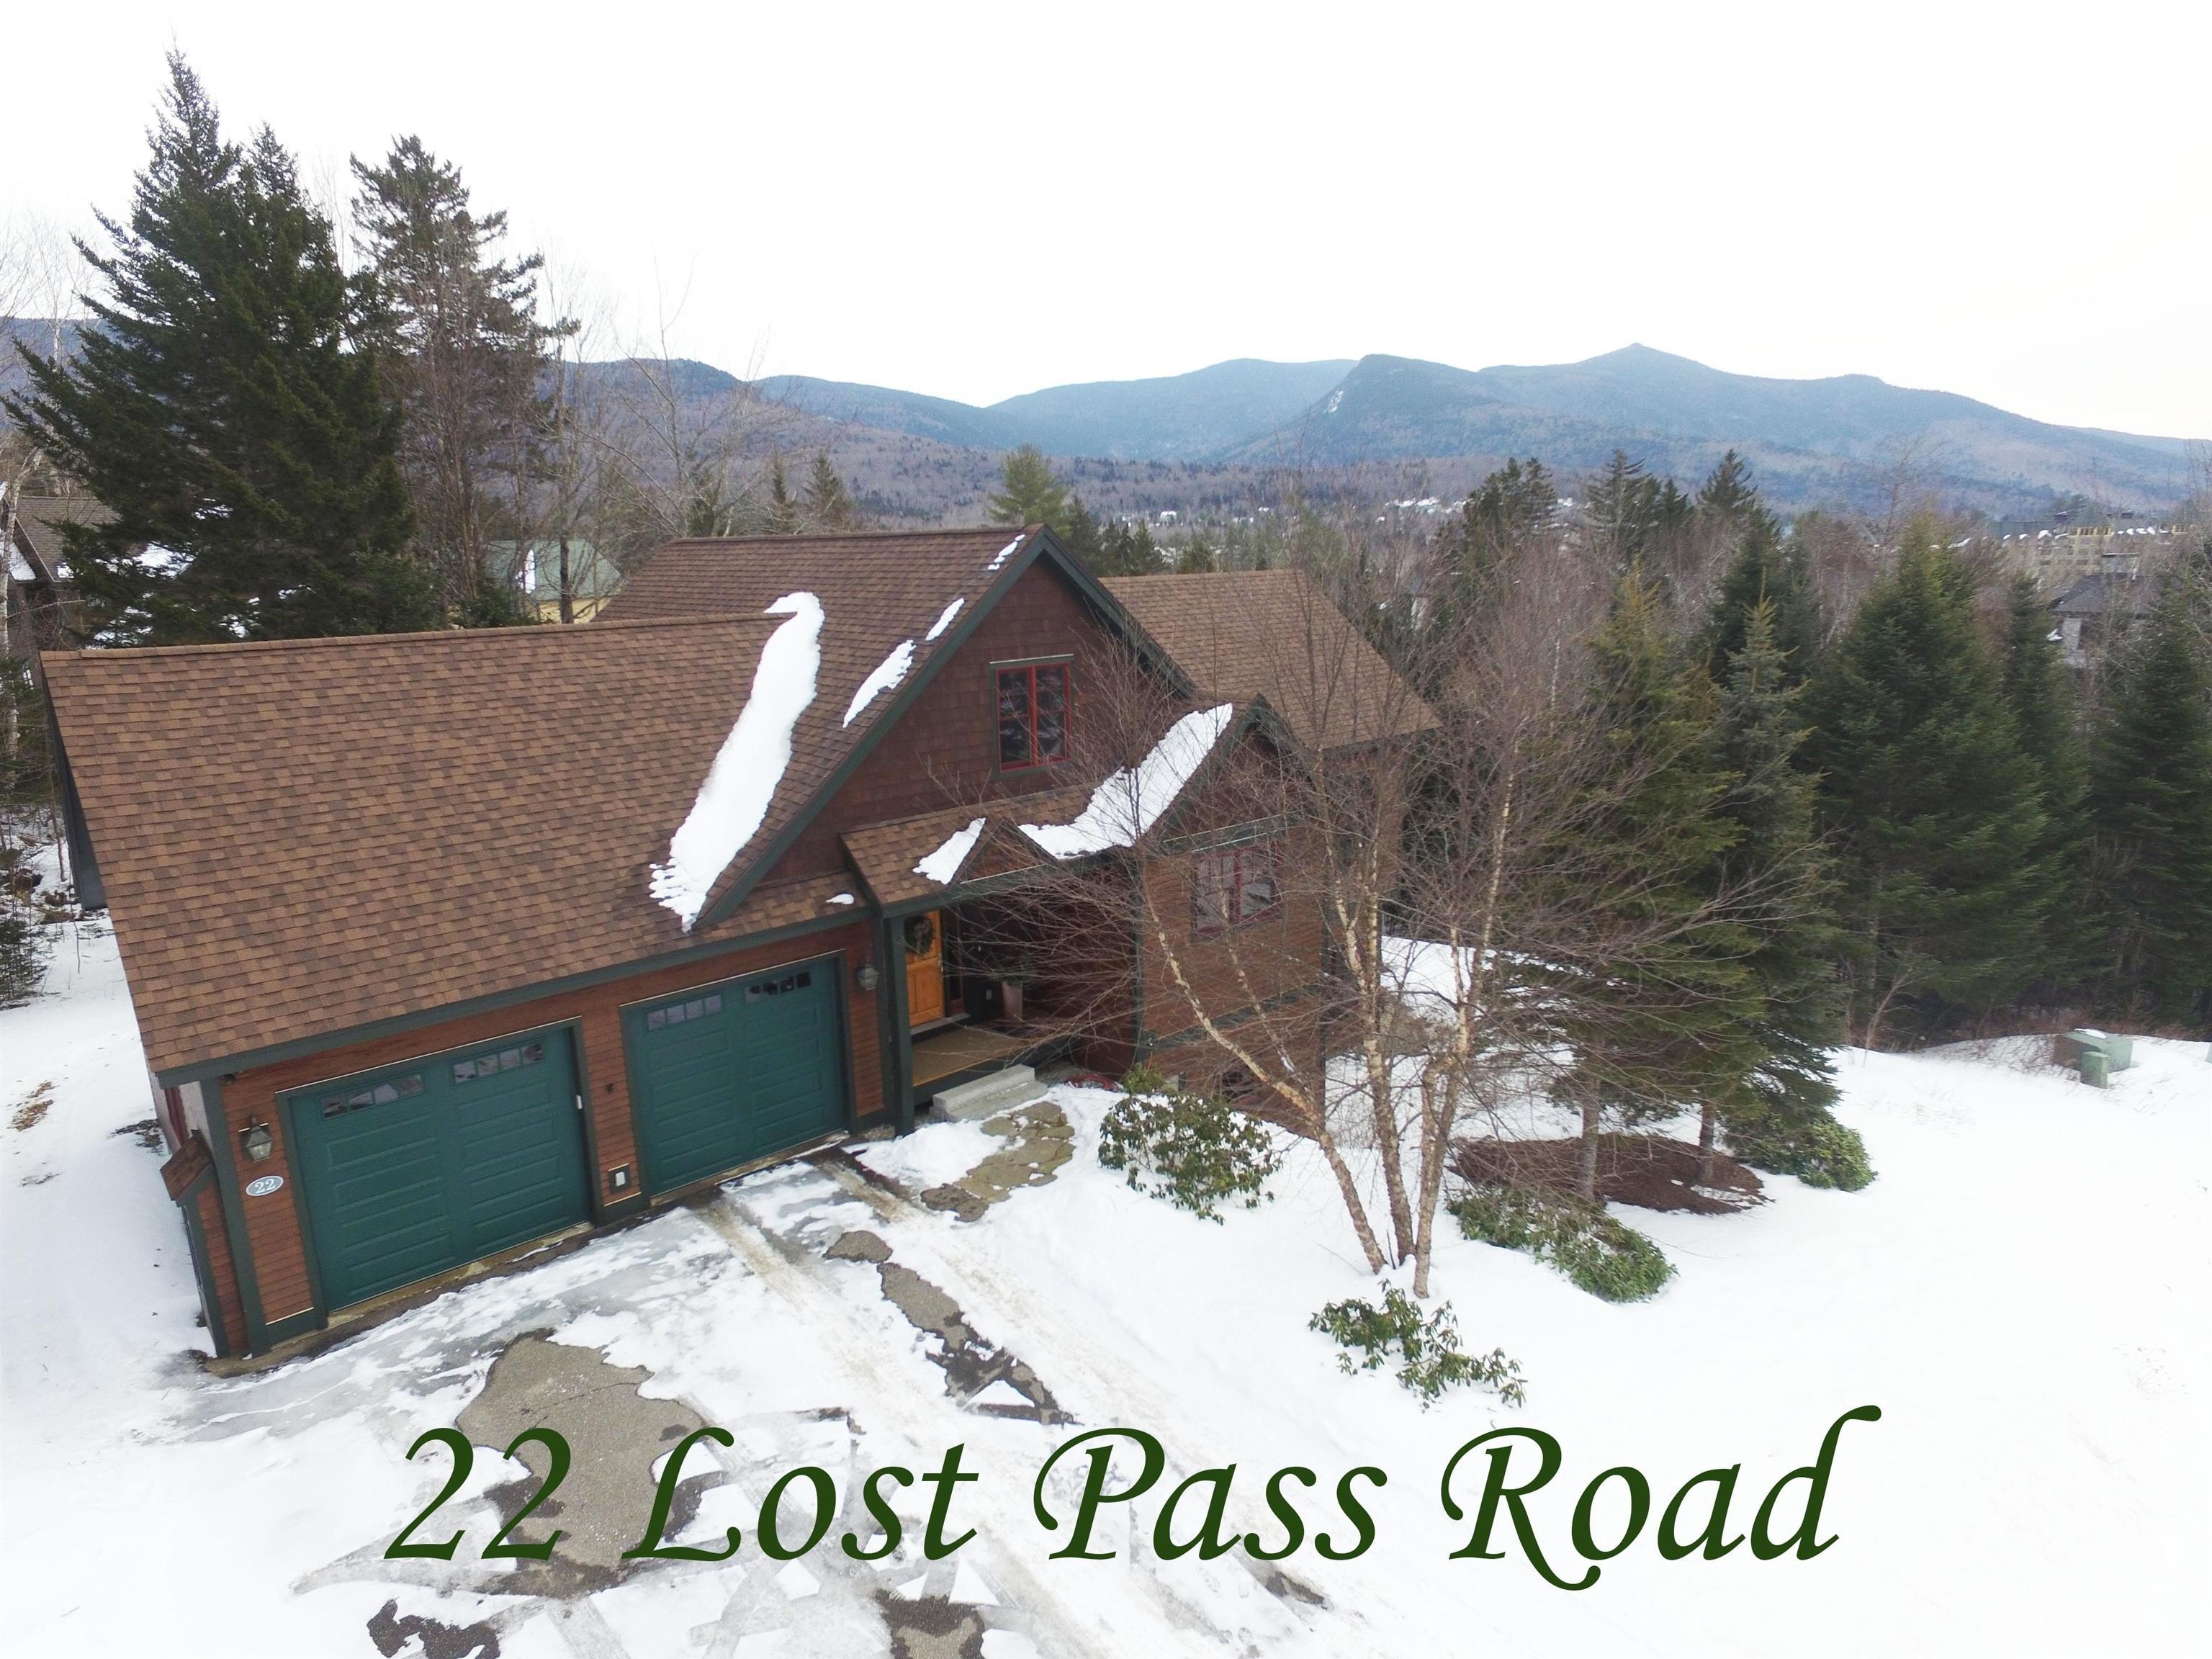 1. 22 Lost Pass Road